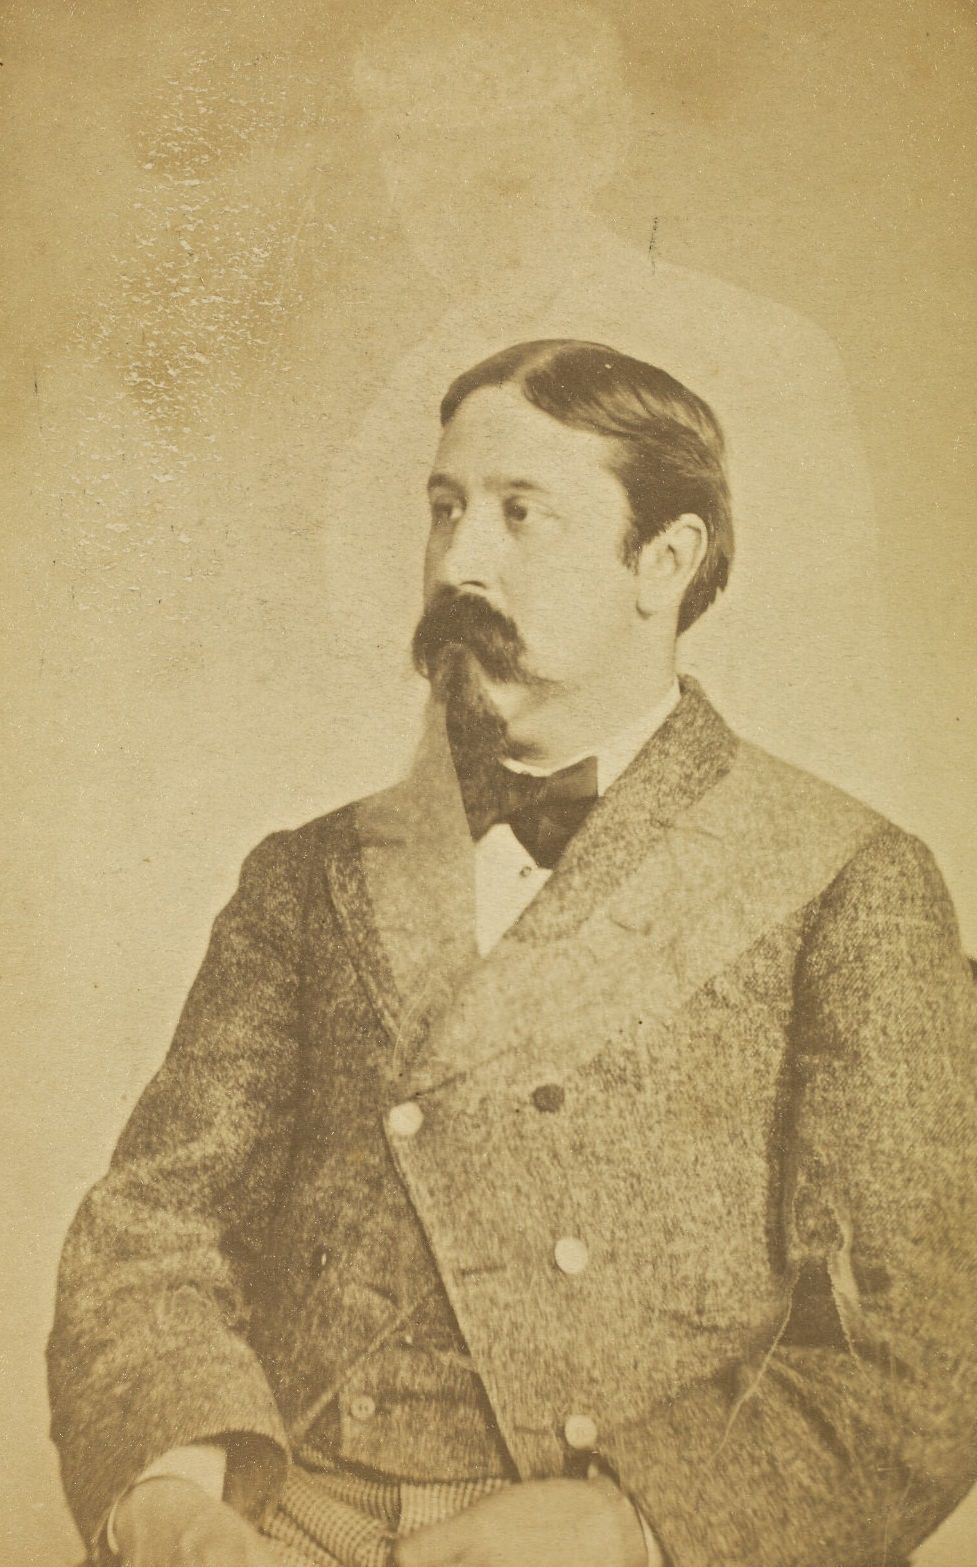 Portrait of Charles H. Foster with a mustache and goatee. A faint image of a woman appears above him.